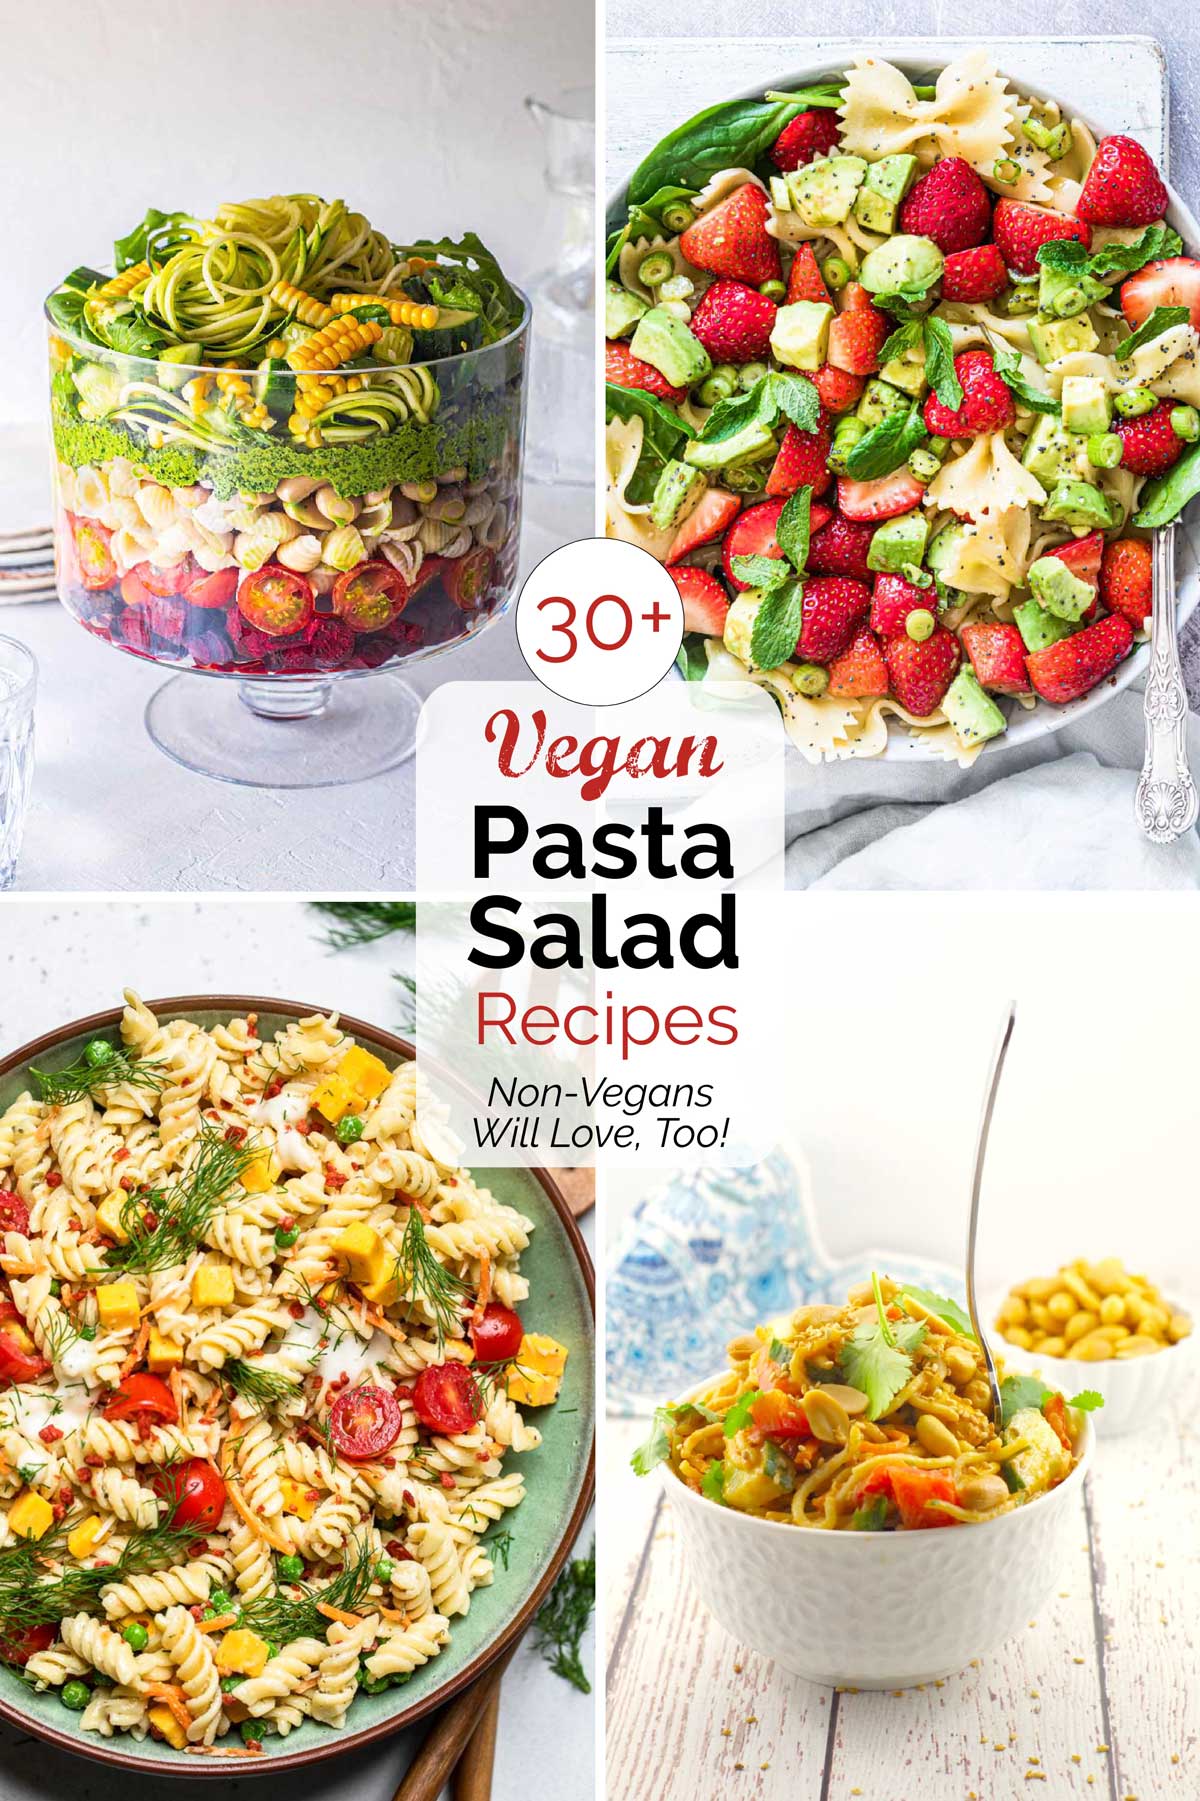 Collage of 4 recipe photos with the text overlay, "30+ Vegan Pasta Salad Recipes Non-Vegans Will Love, Too!".